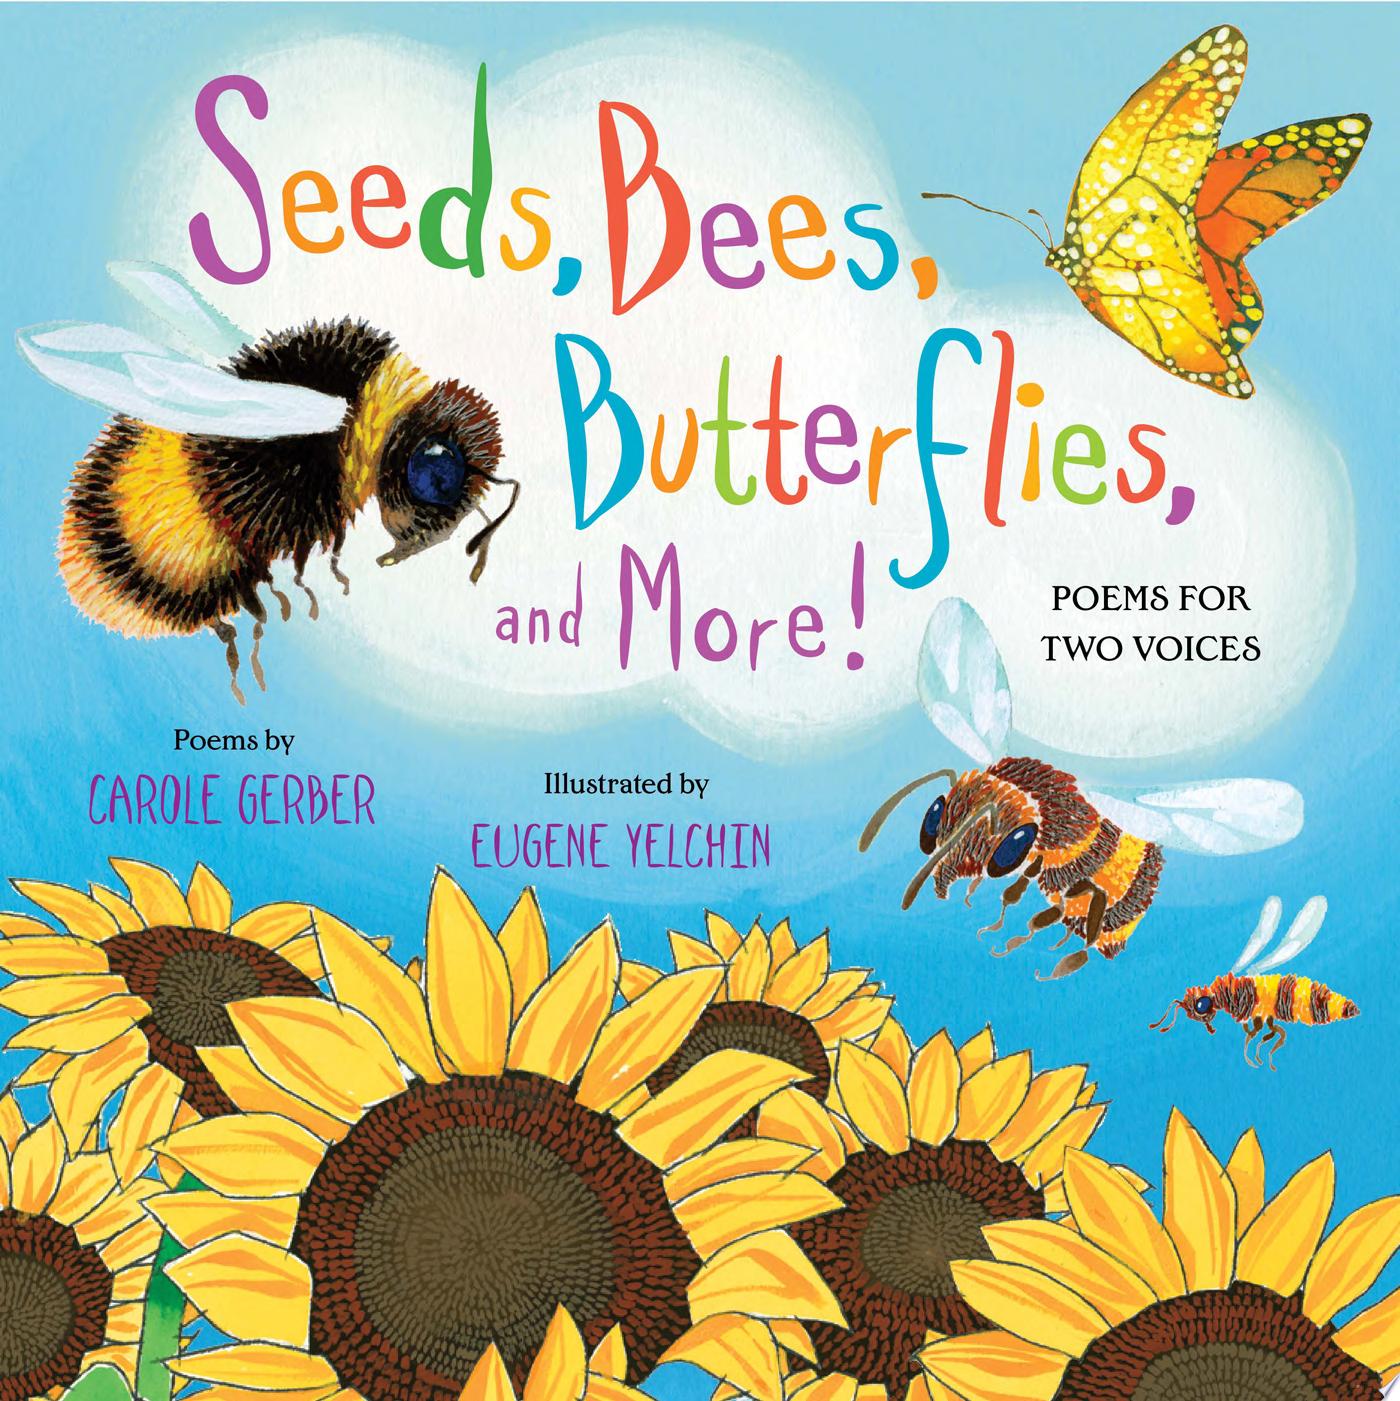 Image for "Seeds, Bees, Butterflies, and More!"